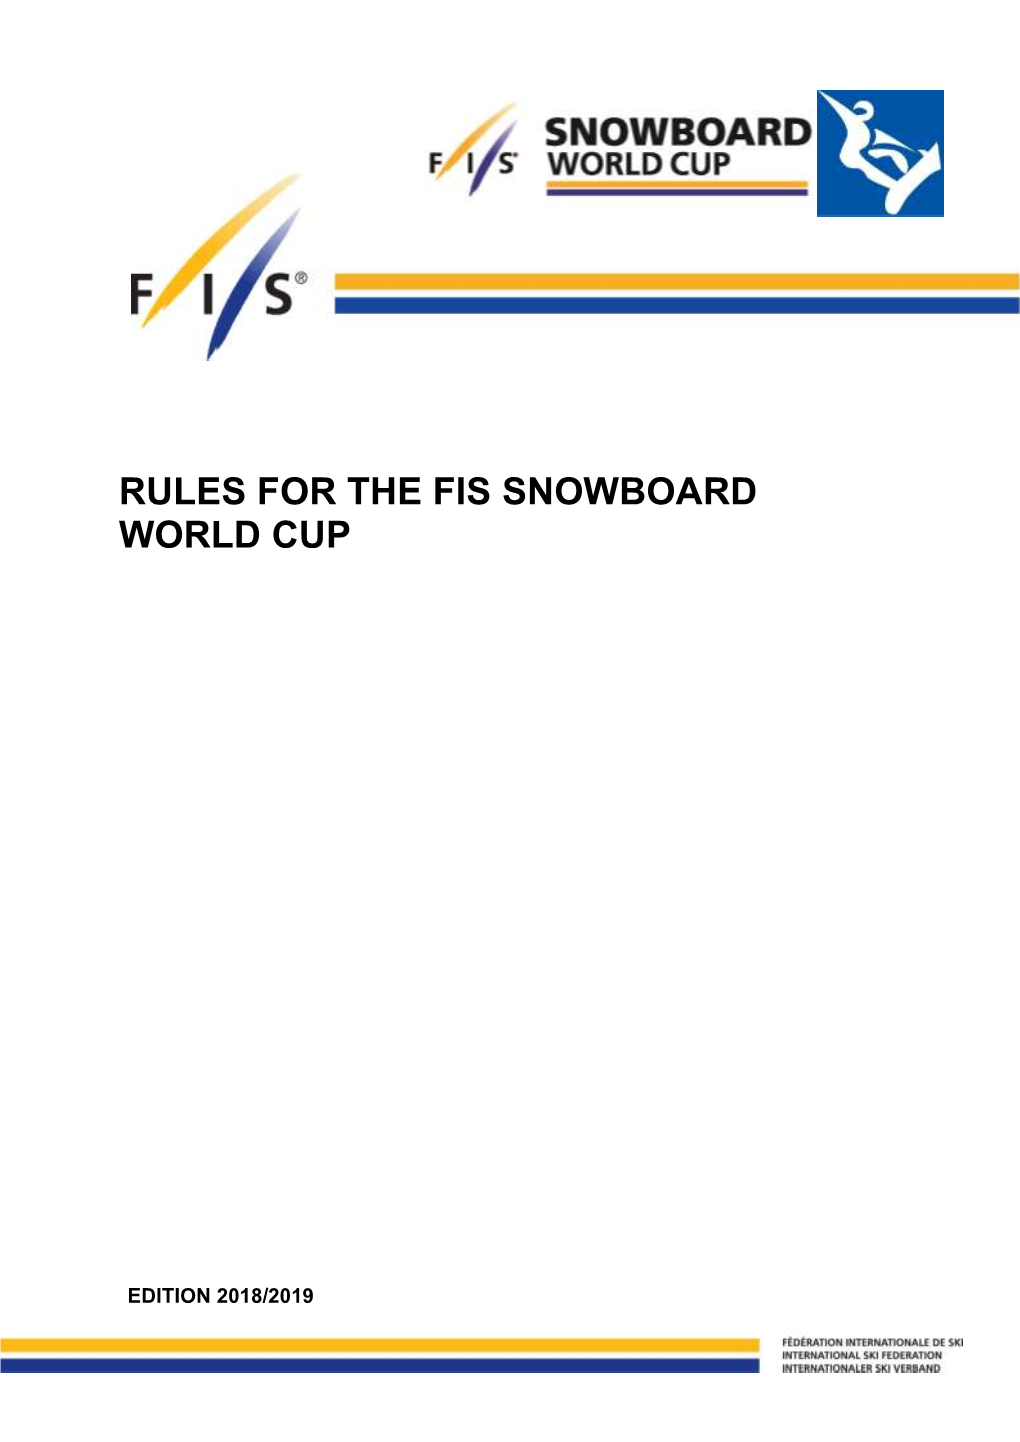 Rules for the Fis Snowboard World Cup